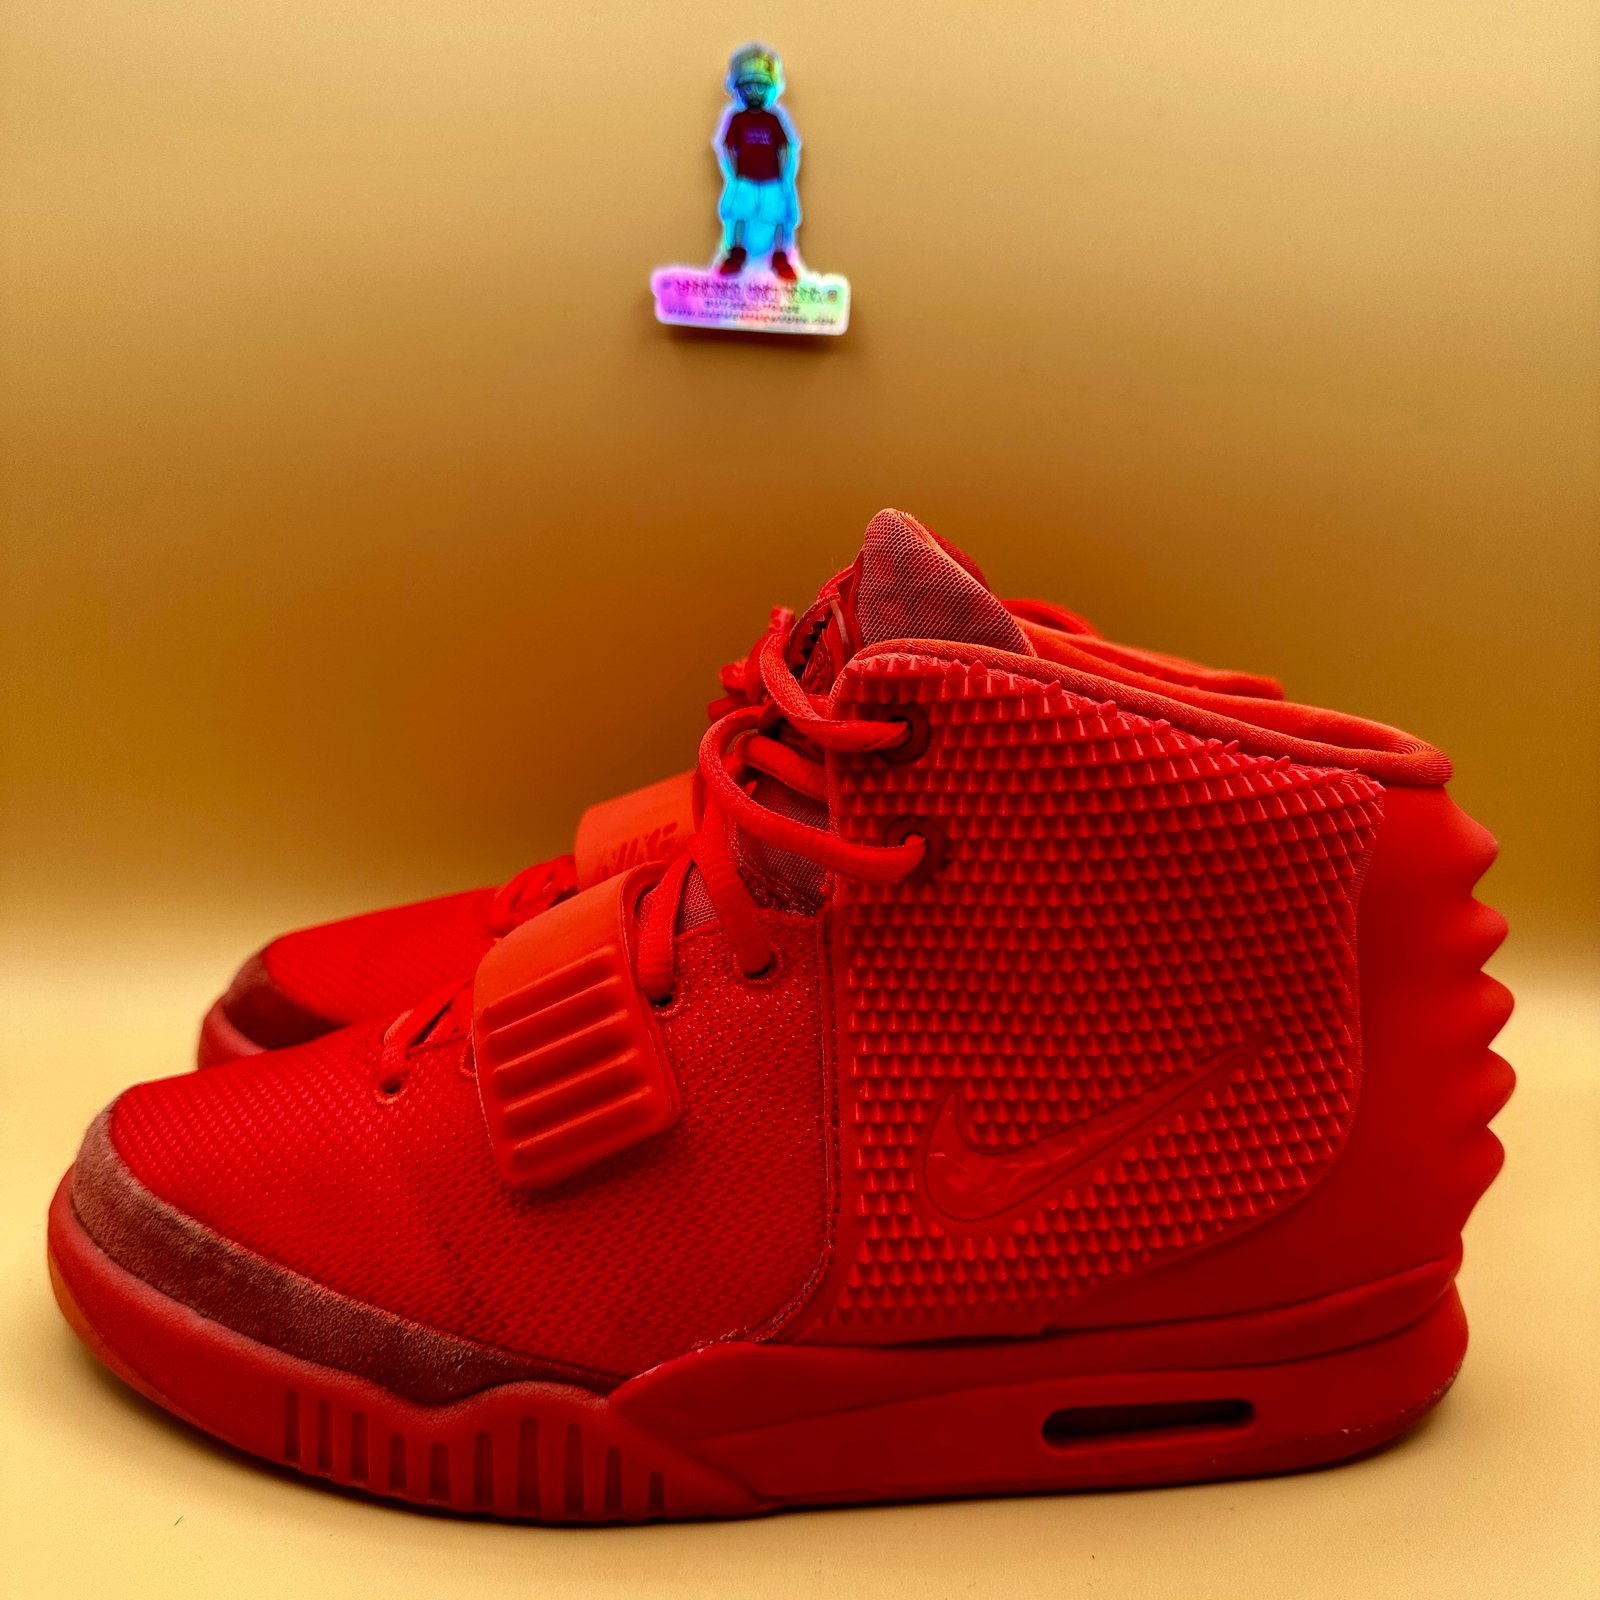 Forføre acceleration ulykke 2014 Nike Air Yeezy 2 “RED OCTOBER” (9.5M) | Garment New York